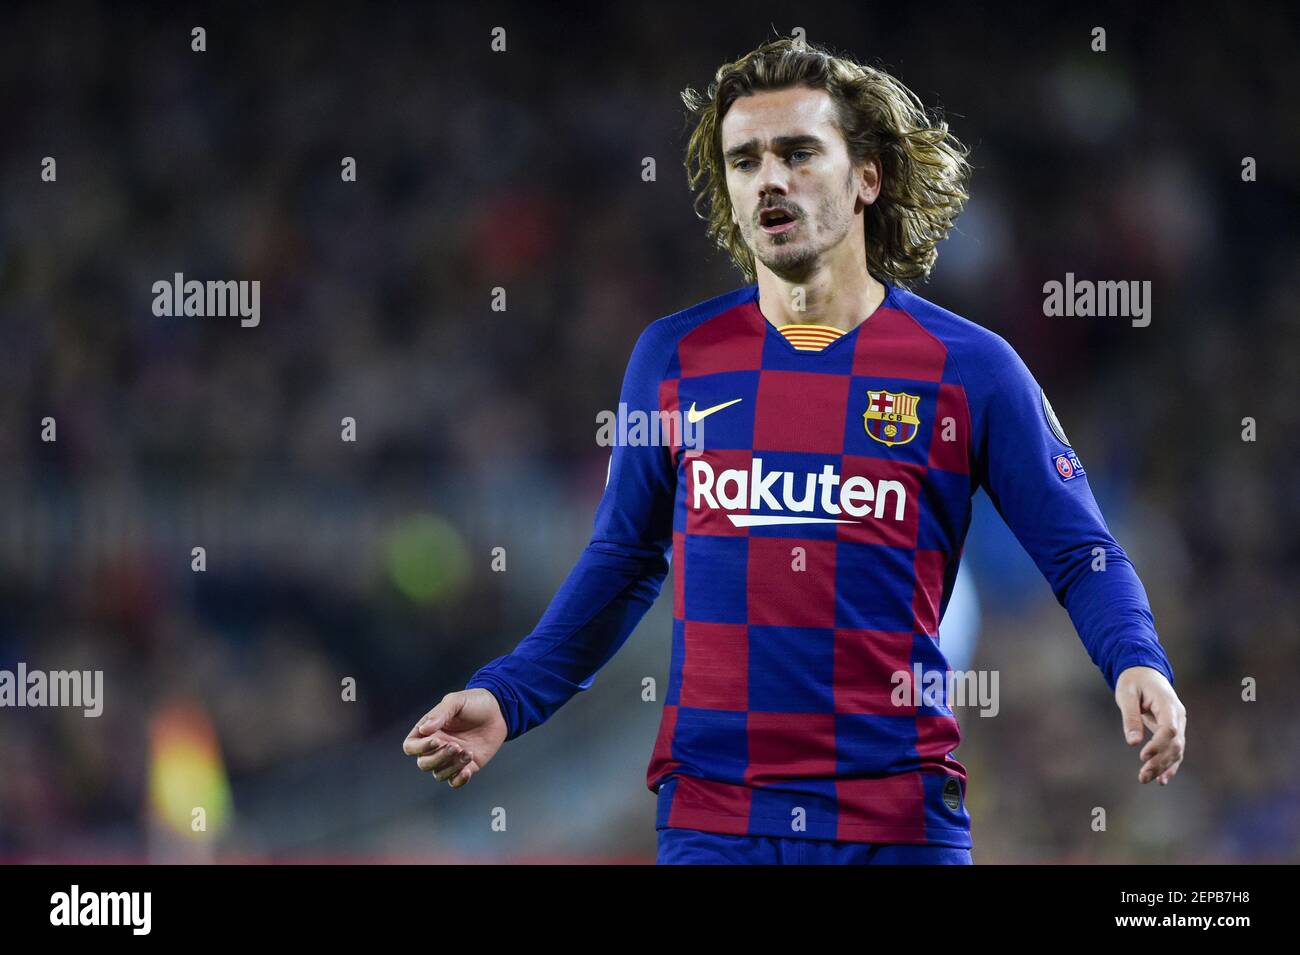 Antoine Griezmann of Barcelona during the UEFA Champions League Group F match between FC Barcelona and Borussia Dortmund at Camp Nou Stadium in Barcelona, Spain on November 27, 2019 (Photo by Andrew Surma / SIPA USA) Stock Photo